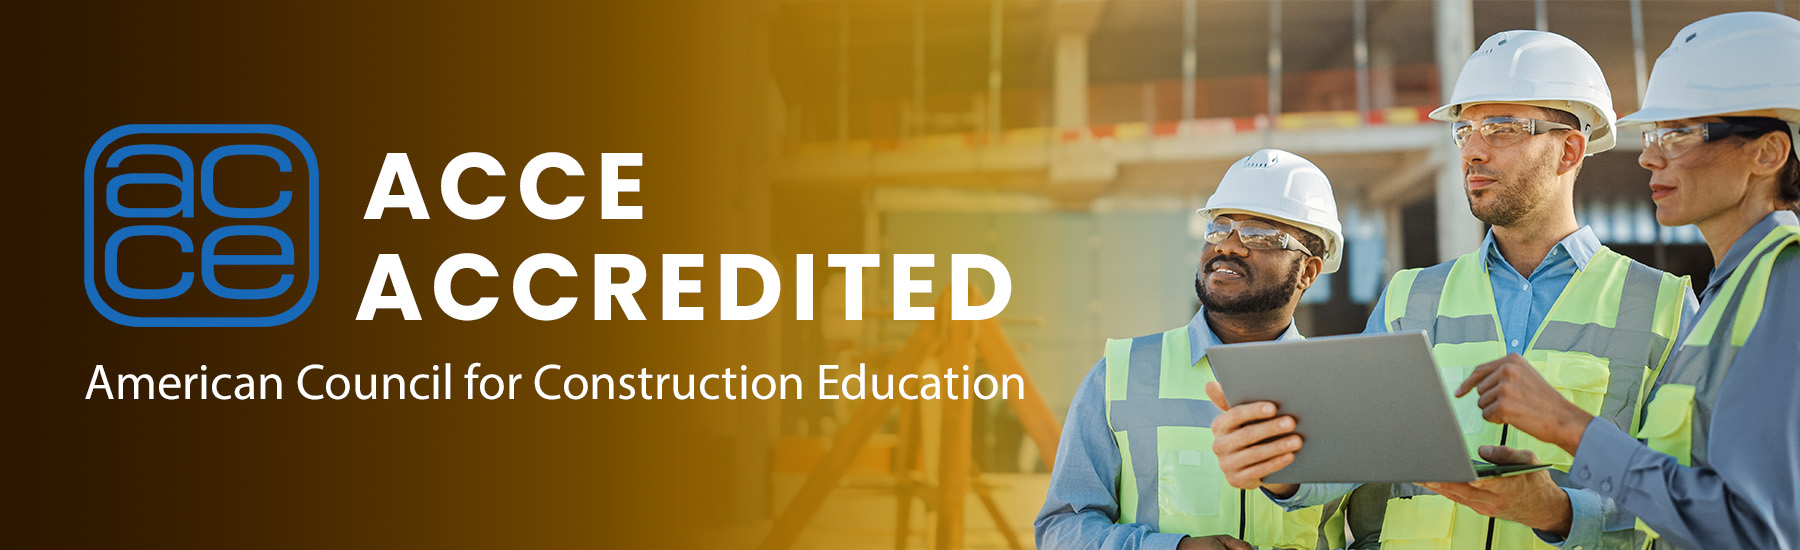 UW-Stout's B,S. Construction is ACCE accredited.